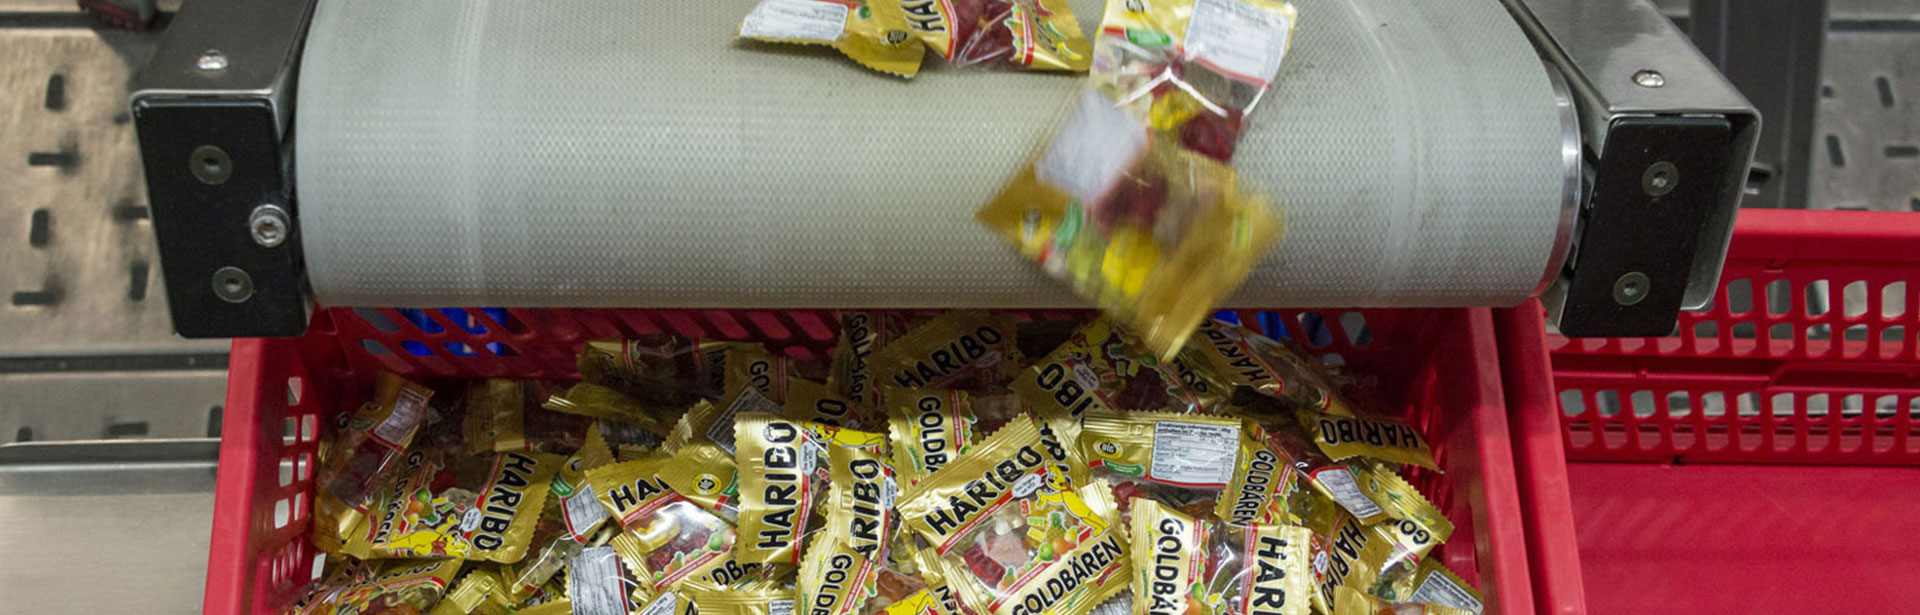 Haribo bags are sorted into boxes on an assembly line